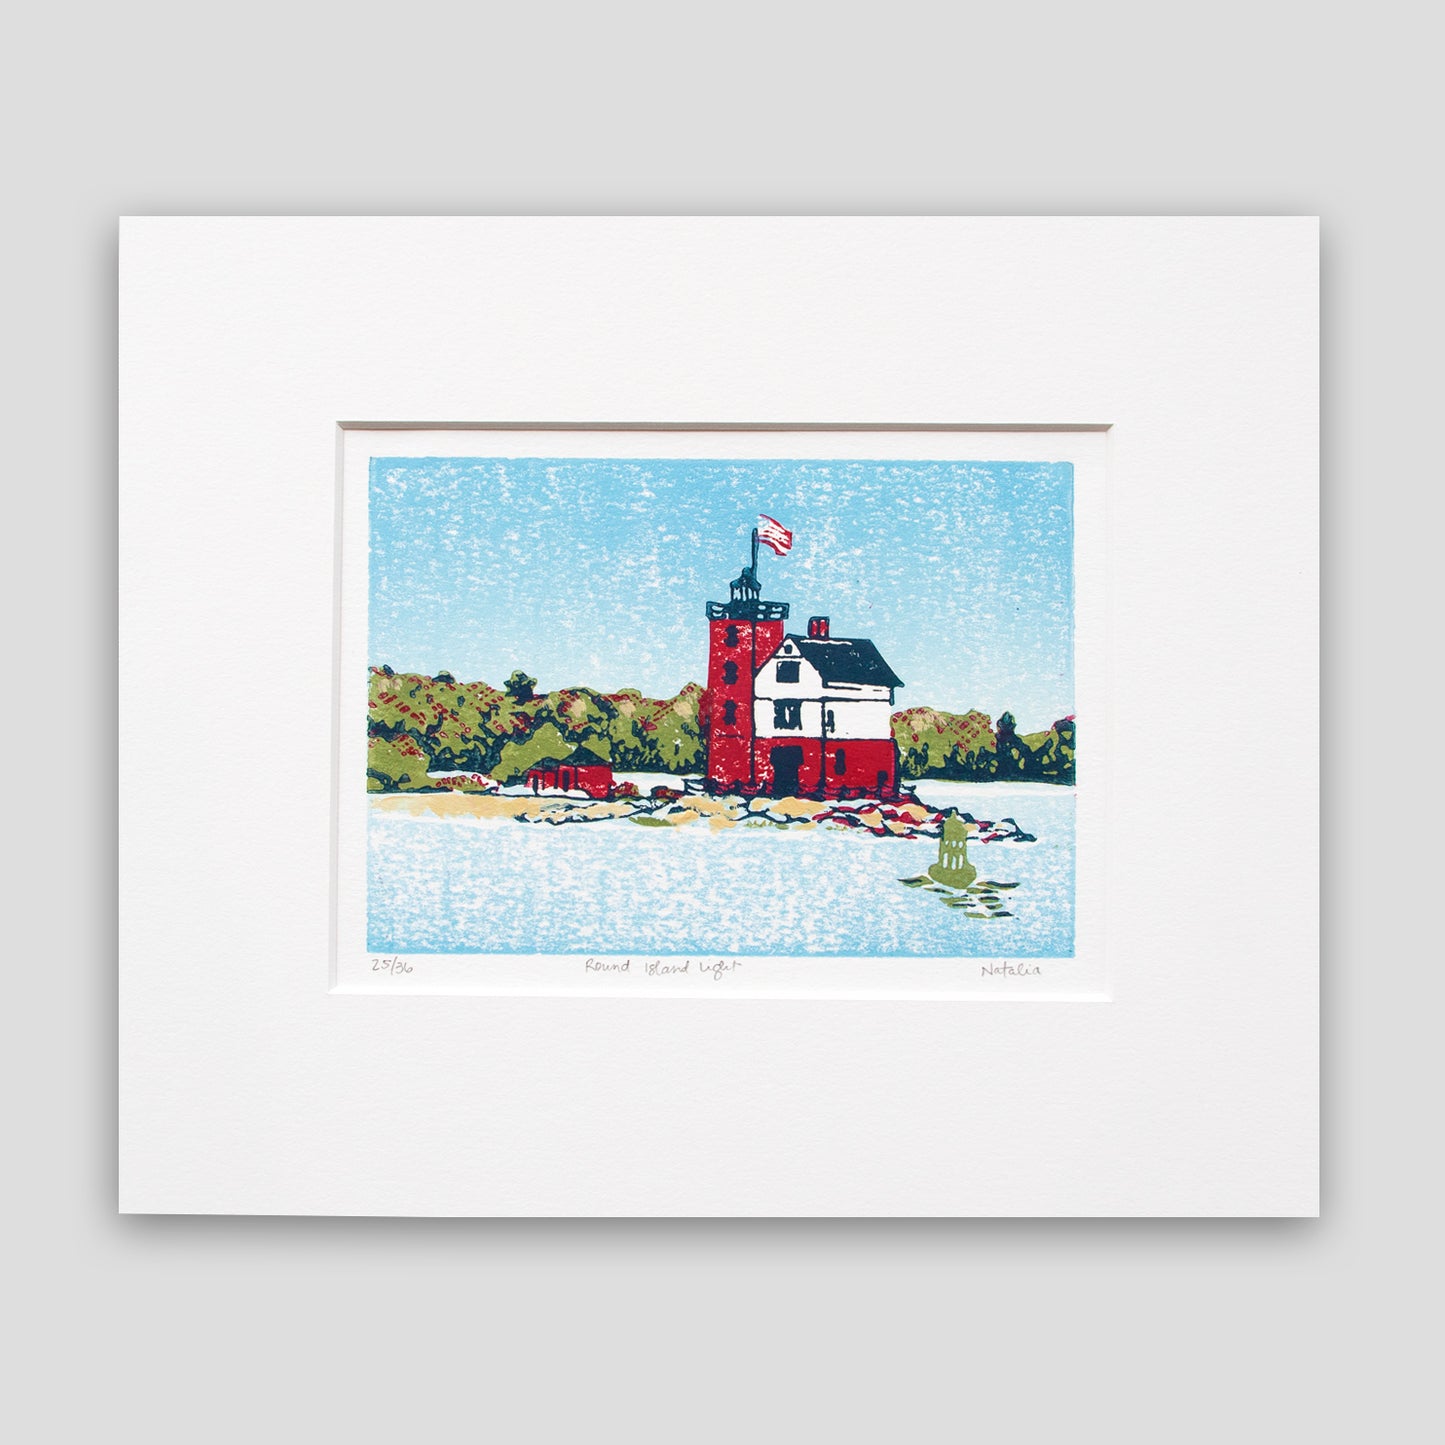 Nautical art created by Natalia Wohletz of Peninsula Prints, Mackinac Island. Round Island Light is a four-color linoleum block print of one of Michigan's most beloved lighthouses. 